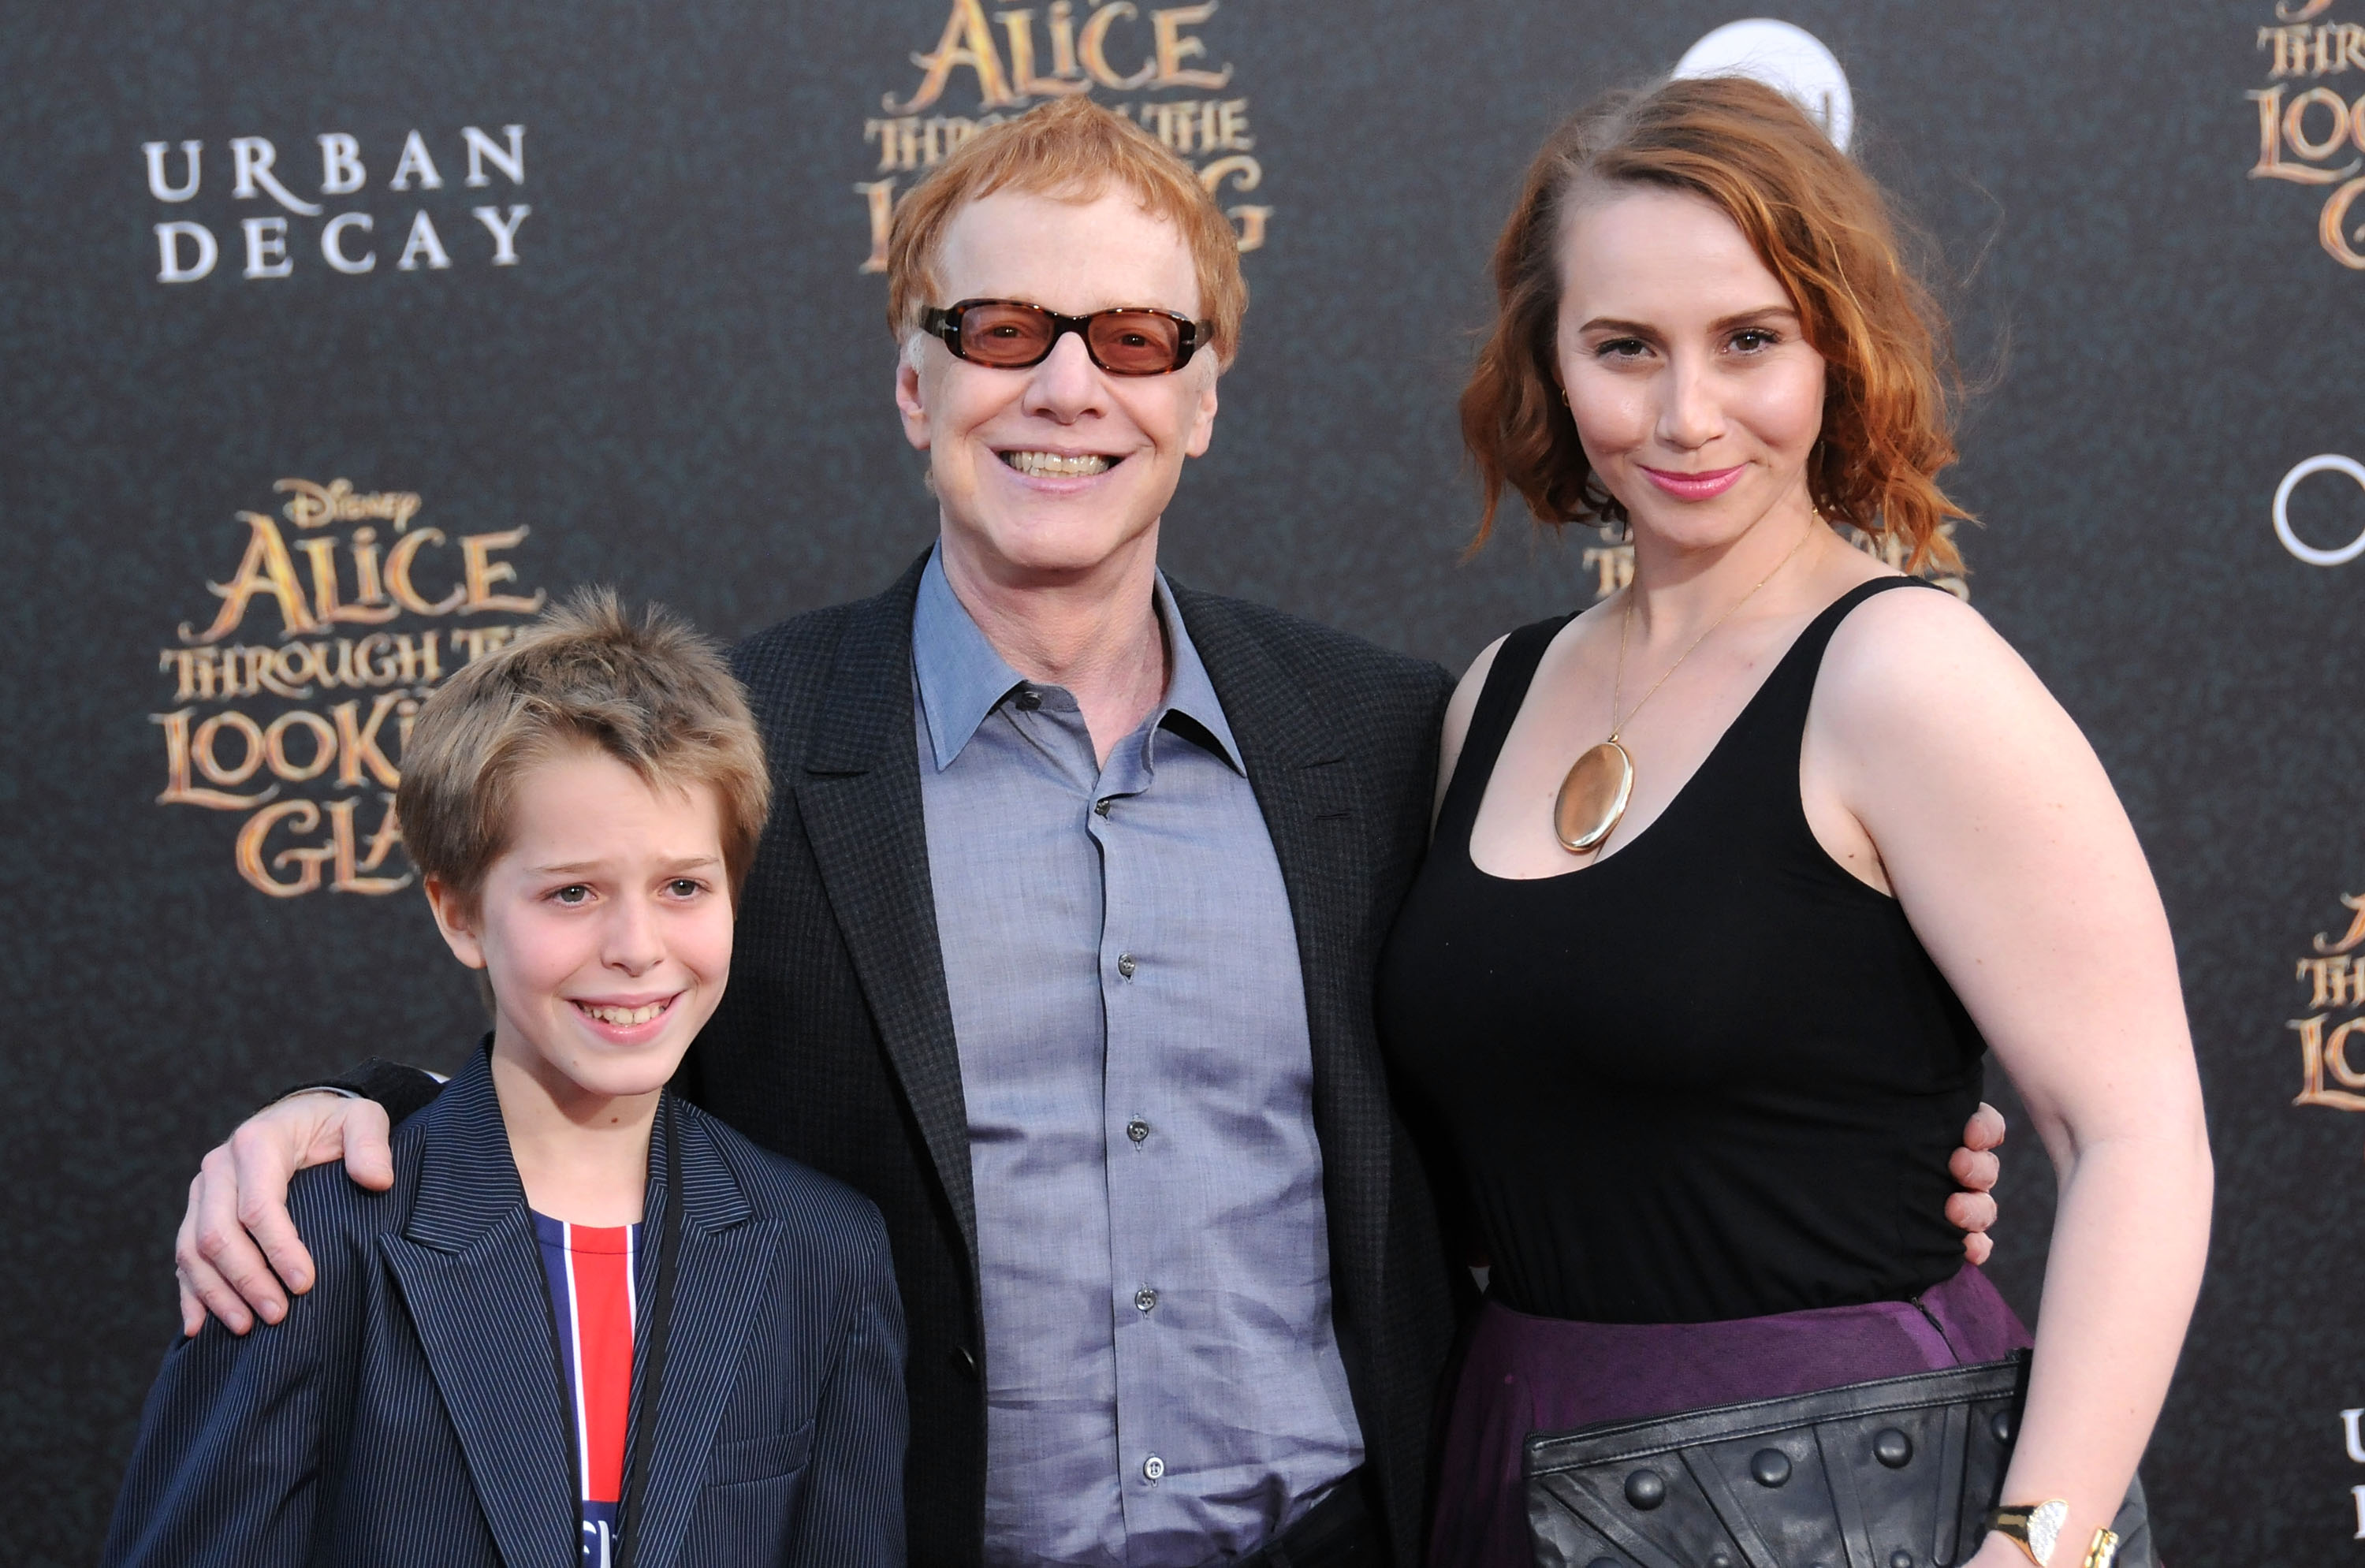 Oliver, Danny and Mali Elfman at the "Alice Through The Looking Glass" premiere in 2016 in Hollywood | Source: Getty Images